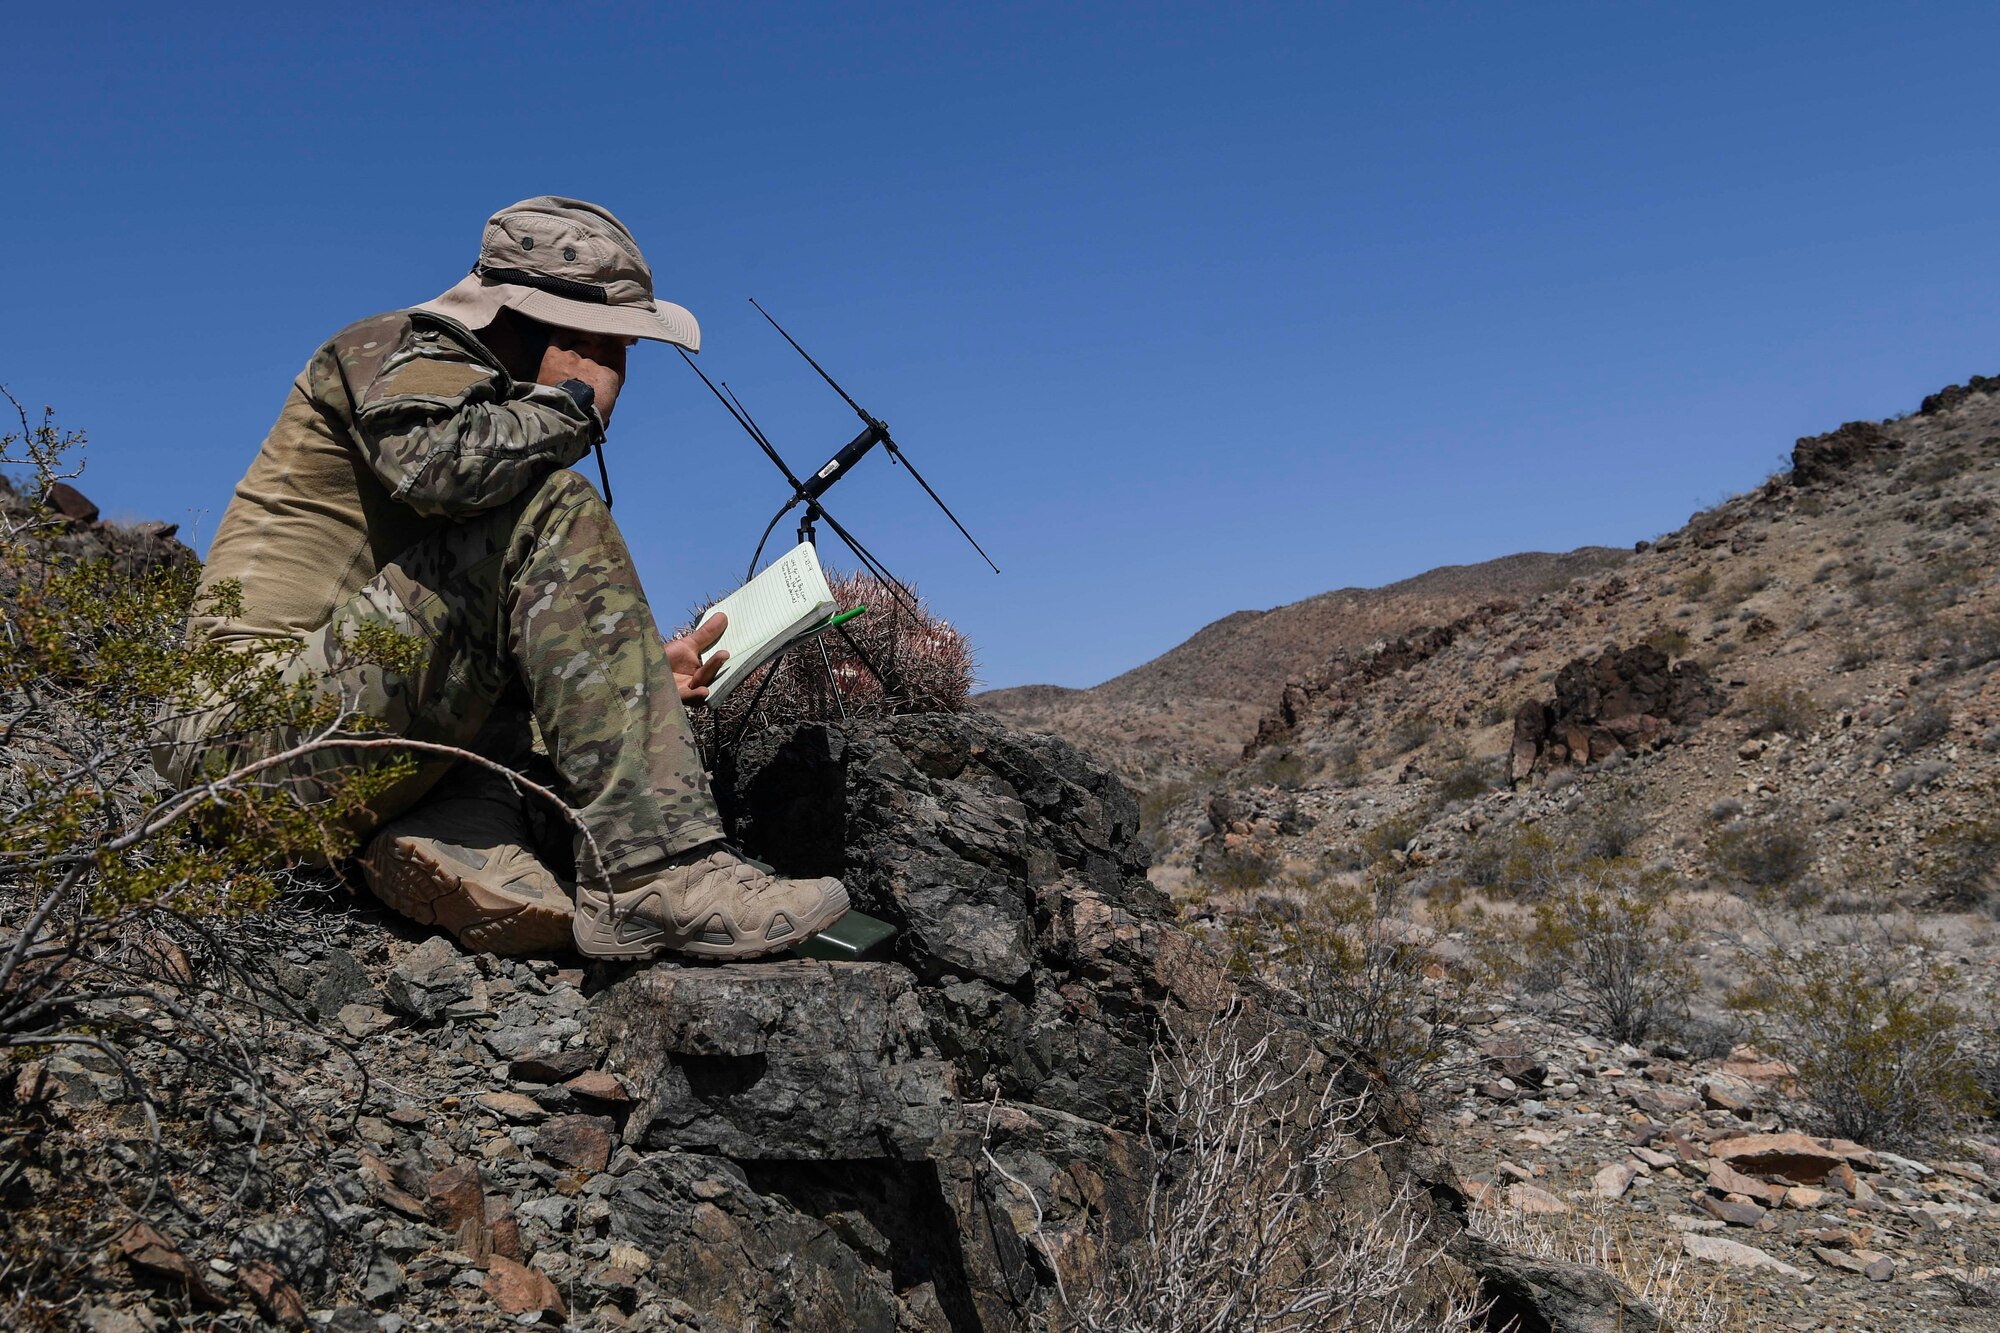 A Special Tactics Airman from the 21st Special Tactics Squadron from Pope Army Airfield, Fort Bragg, North Carolina, uses a satellite communication antenna to coordinate precision fires with his joint team during a scenario as part of NTC 18-10 at Fort Irwin, California, Sept. 2, 2018.